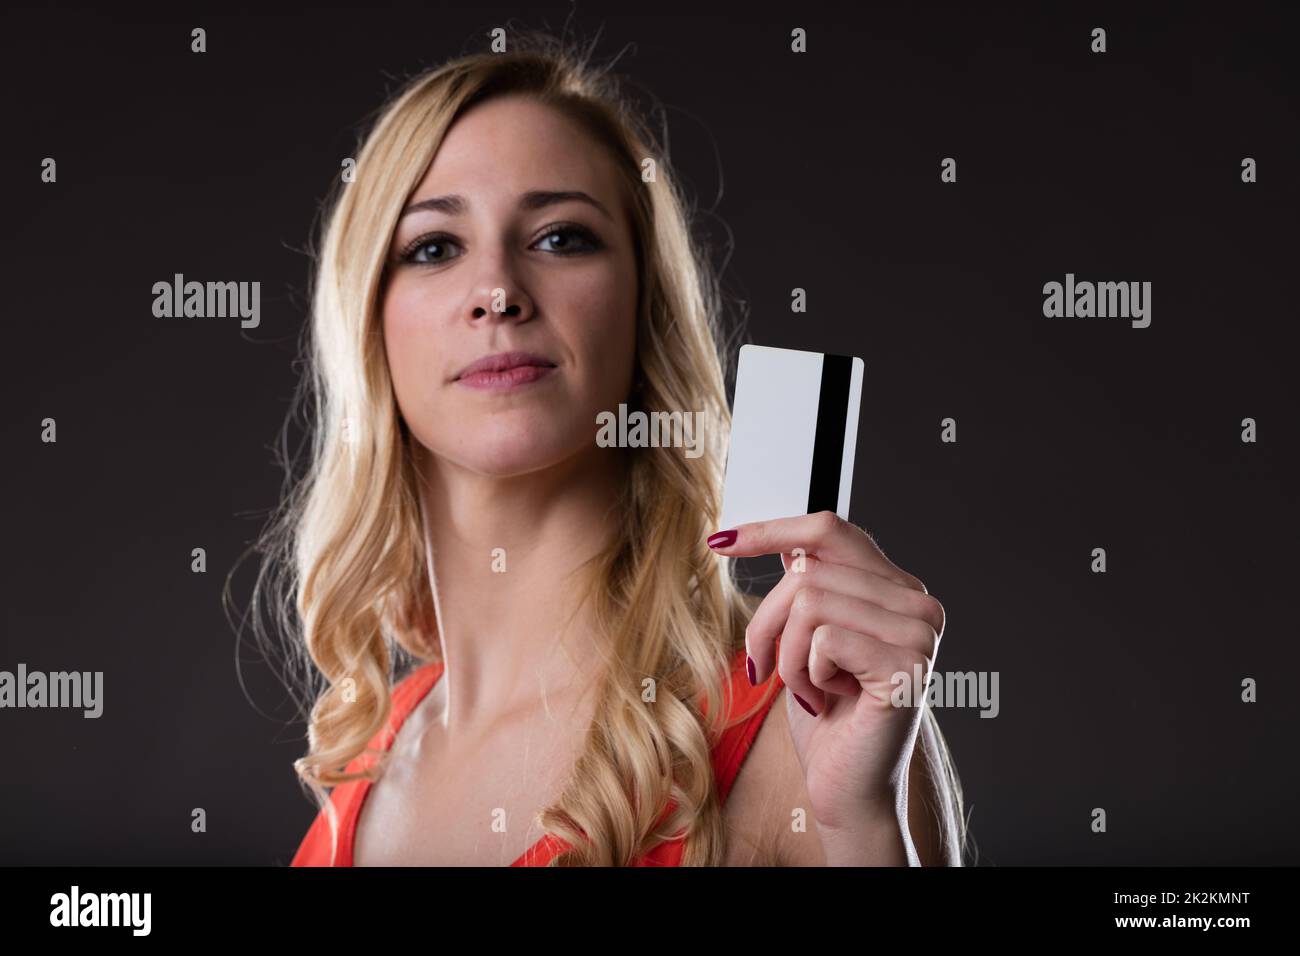 find out whose is this credit card Stock Photo